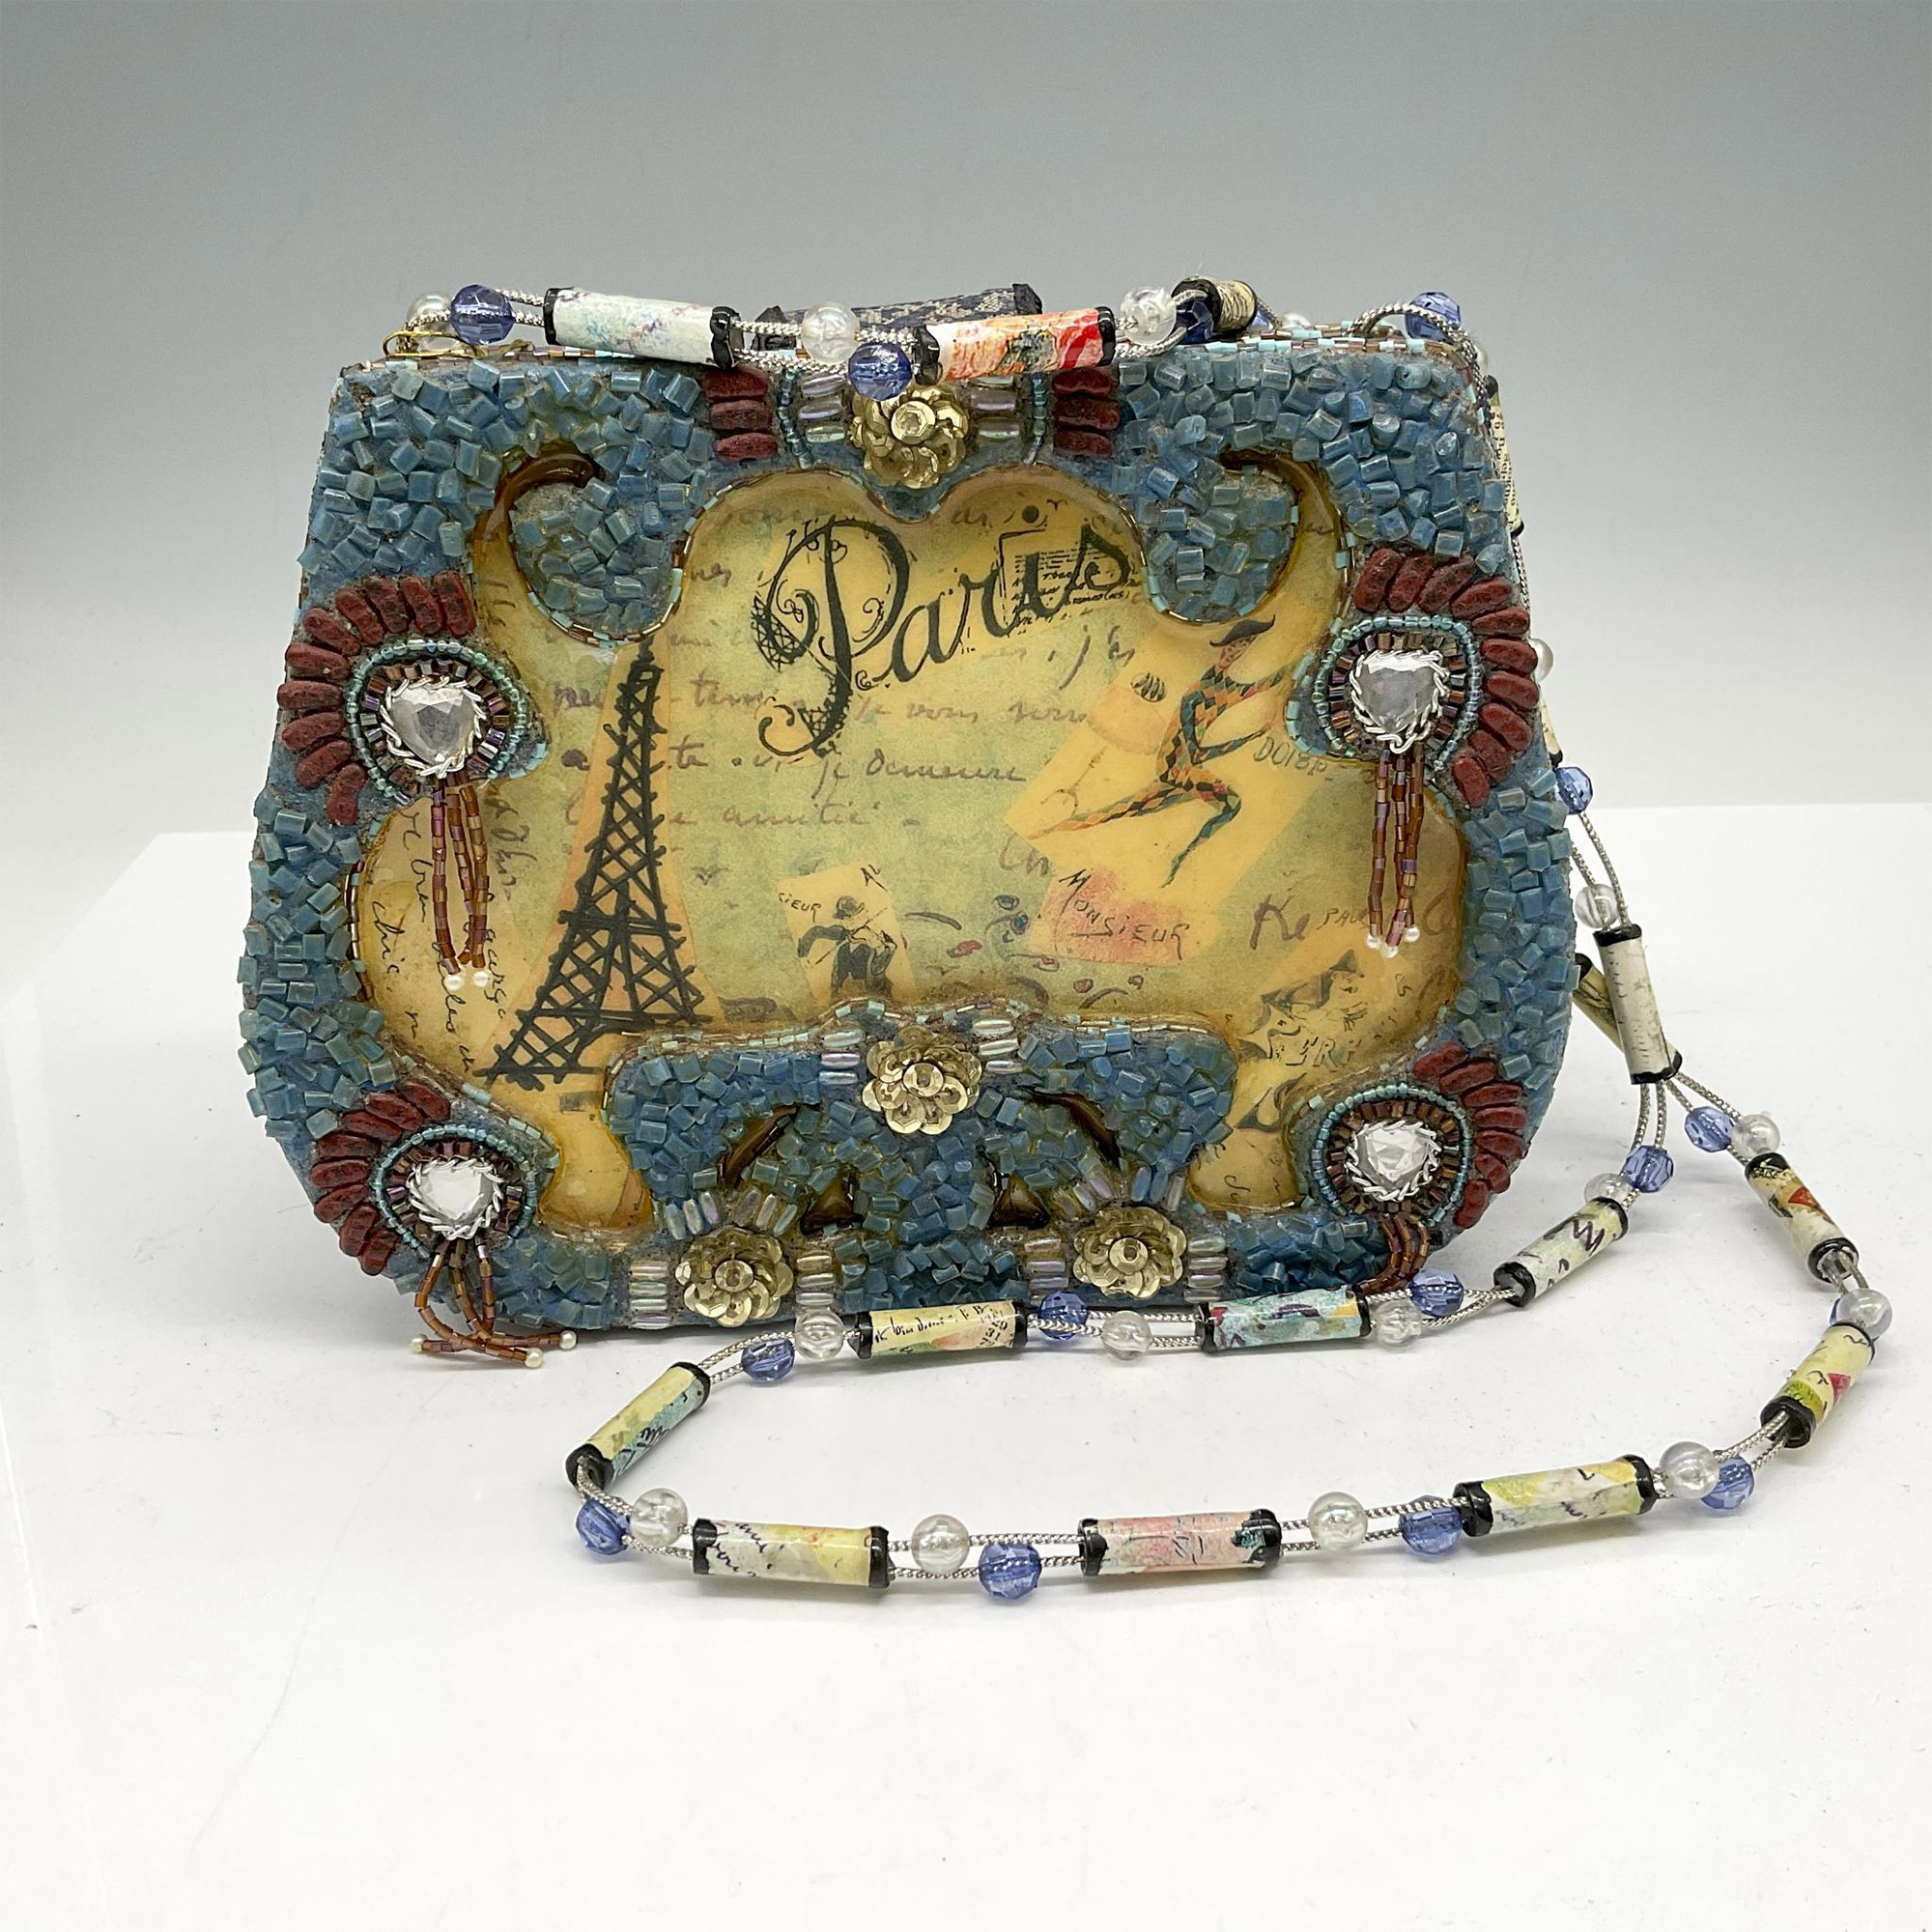 Mary Francis Shoulder Bag, French Connection - Image 2 of 3